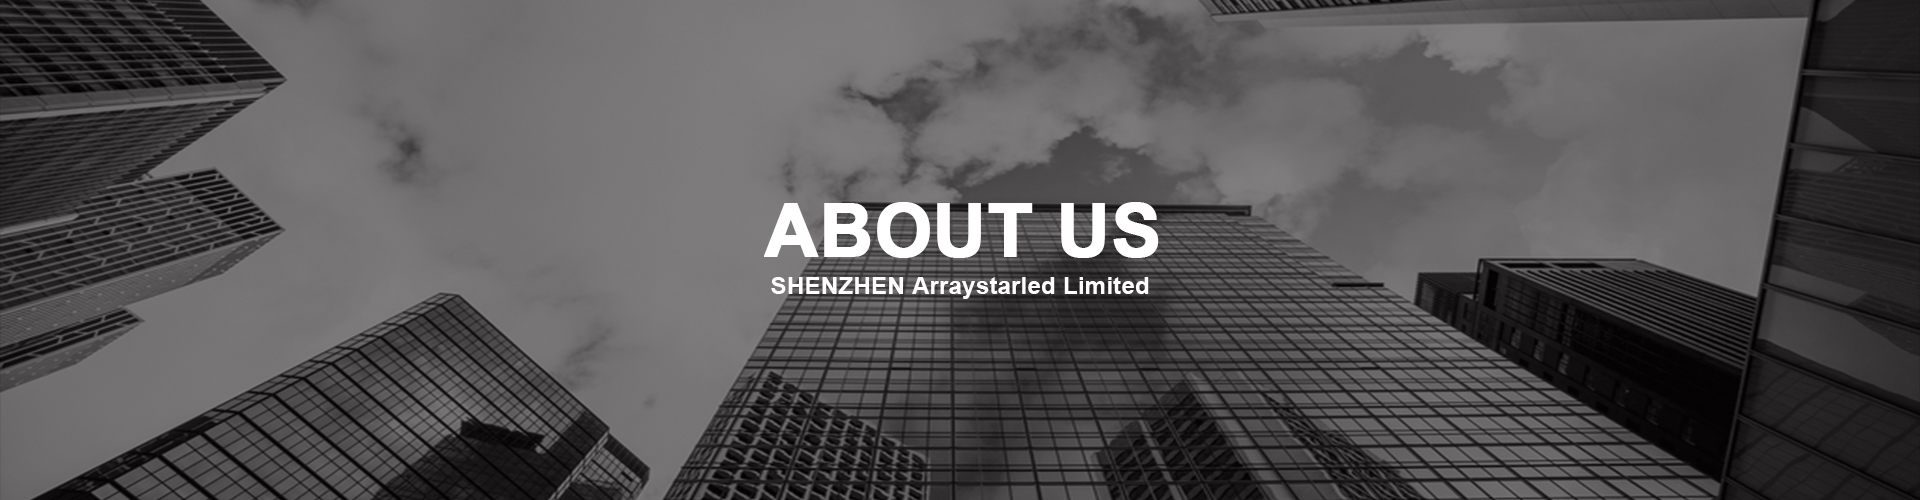 About us | ShenZhen Arraystarled Limited